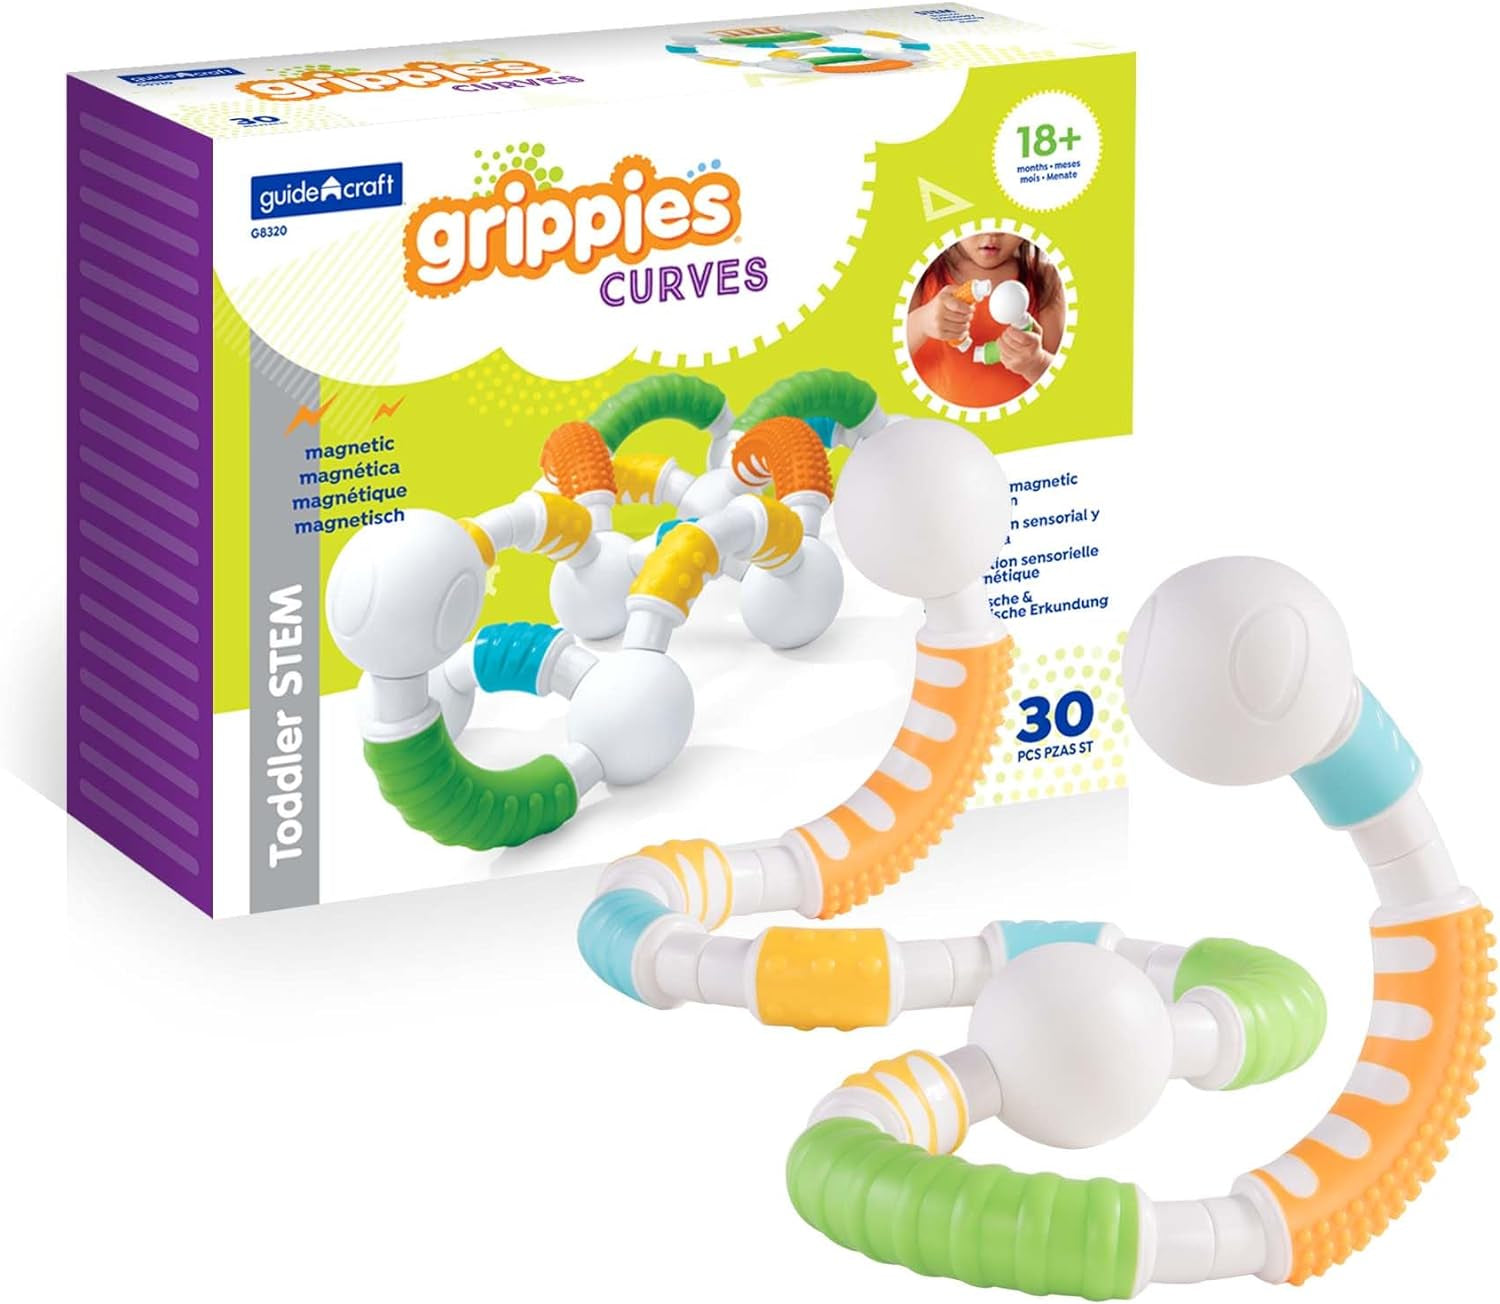 Grippies Waves - 20 Piece Set: STEM Magnetic Building Set for Toddlers, Kids Learning and Educational Toys